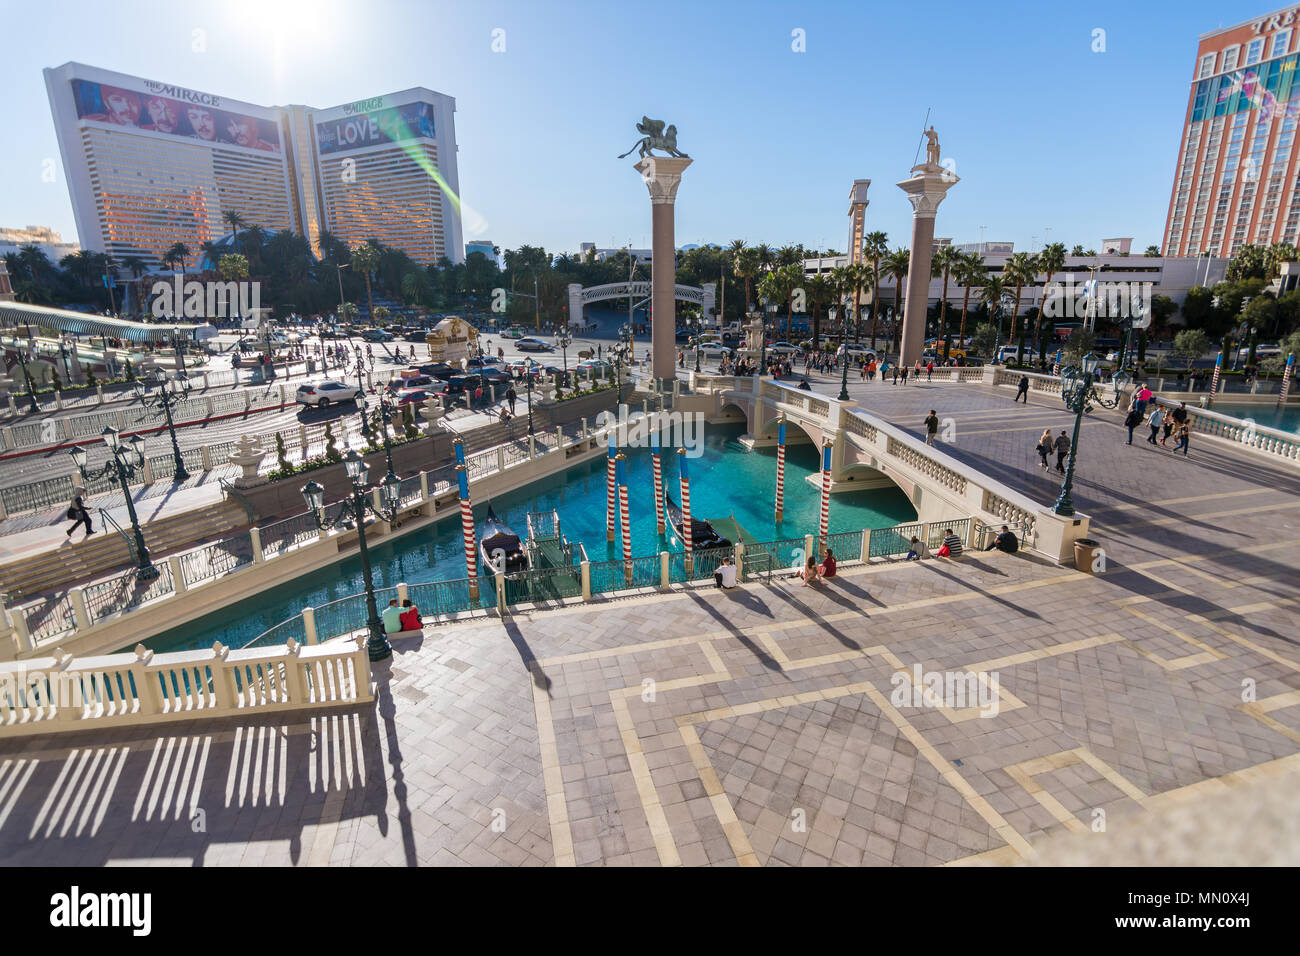 Las Vegas, US - April 27, 2018: Tourists visting the famous Venician hotel  in Las Vegas as seen on a sunny day Stock Photo